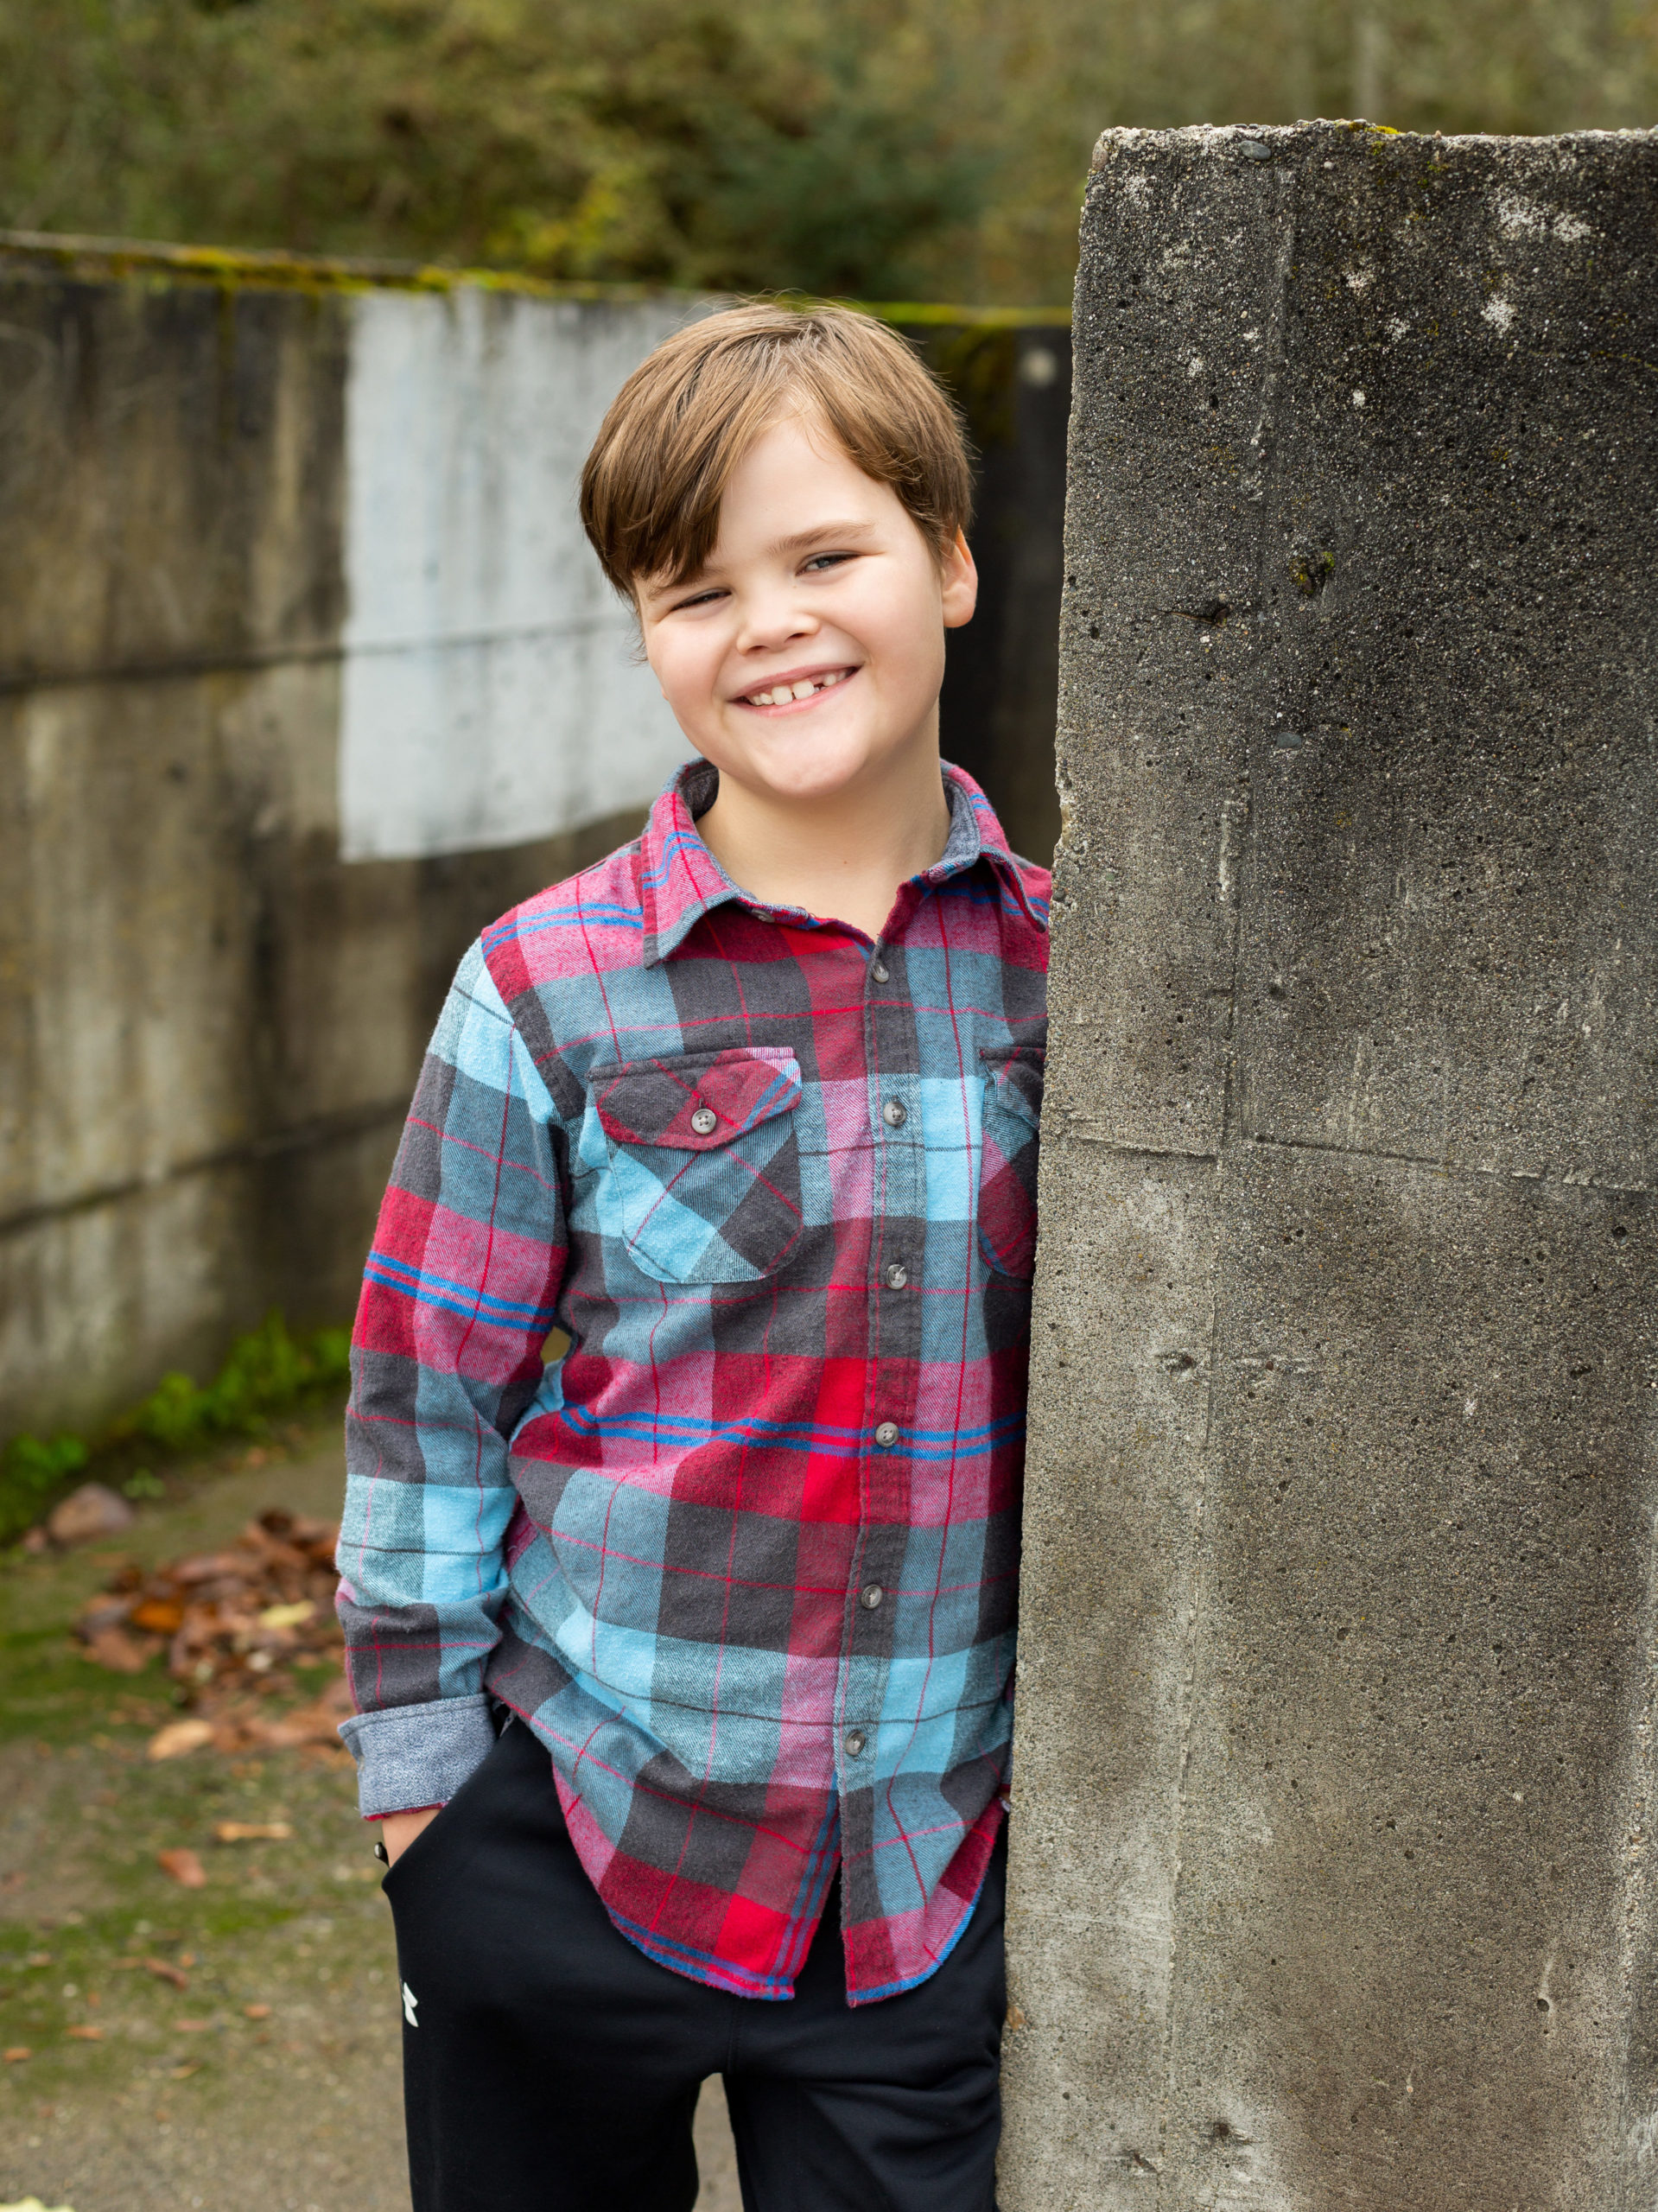 An elementary school aged boy is leaning against a concrete wall of an old building at Luther Burbank Park on Mercer Island in Washington state. The boy is wearing a blue and red flannel shirt. He's got his hand in his pocket and he is smiling at the camera.